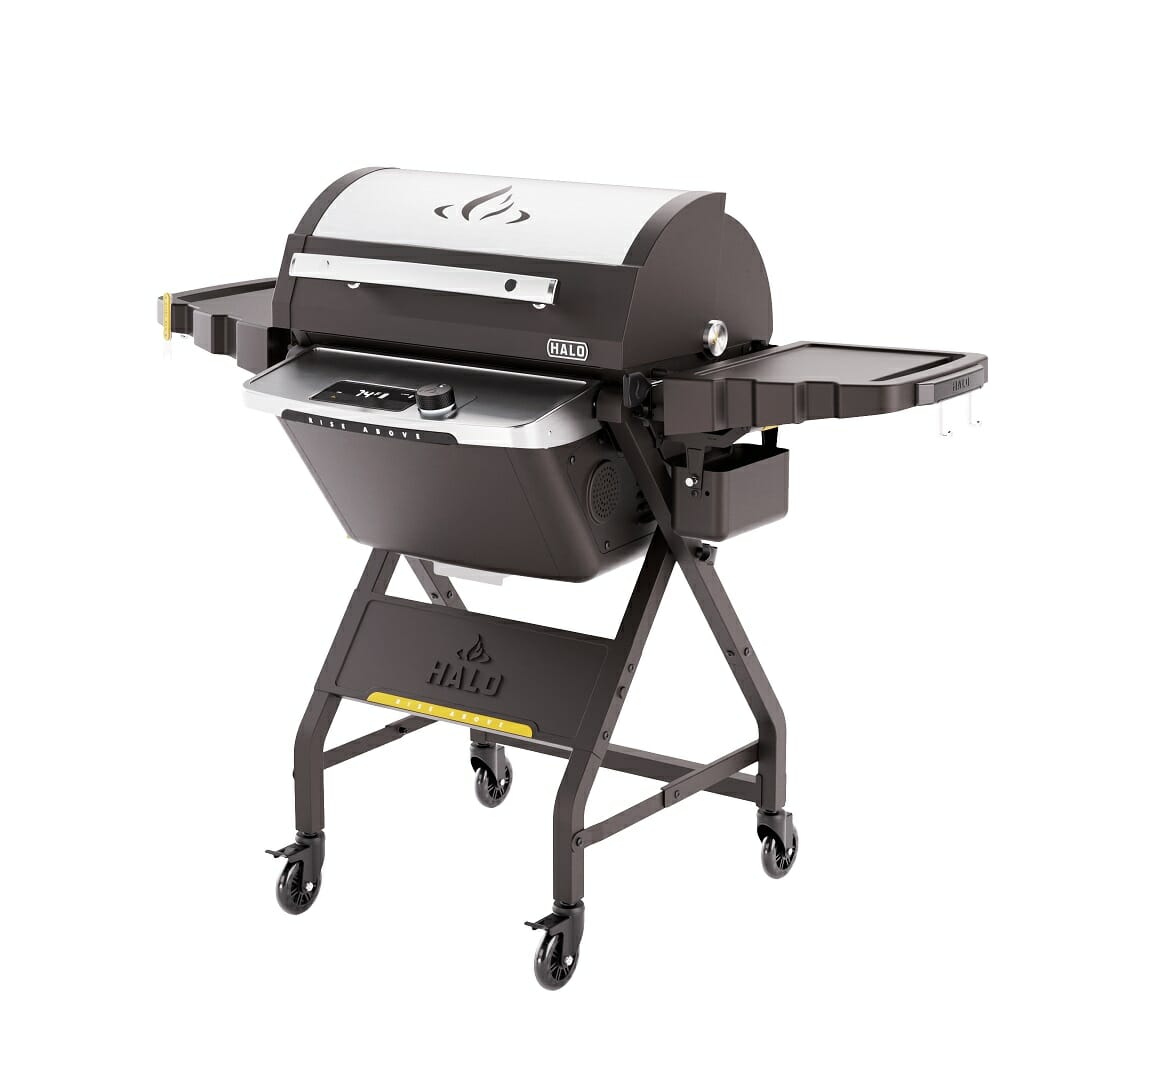 HALO Prime Pellet Grill at an Angle